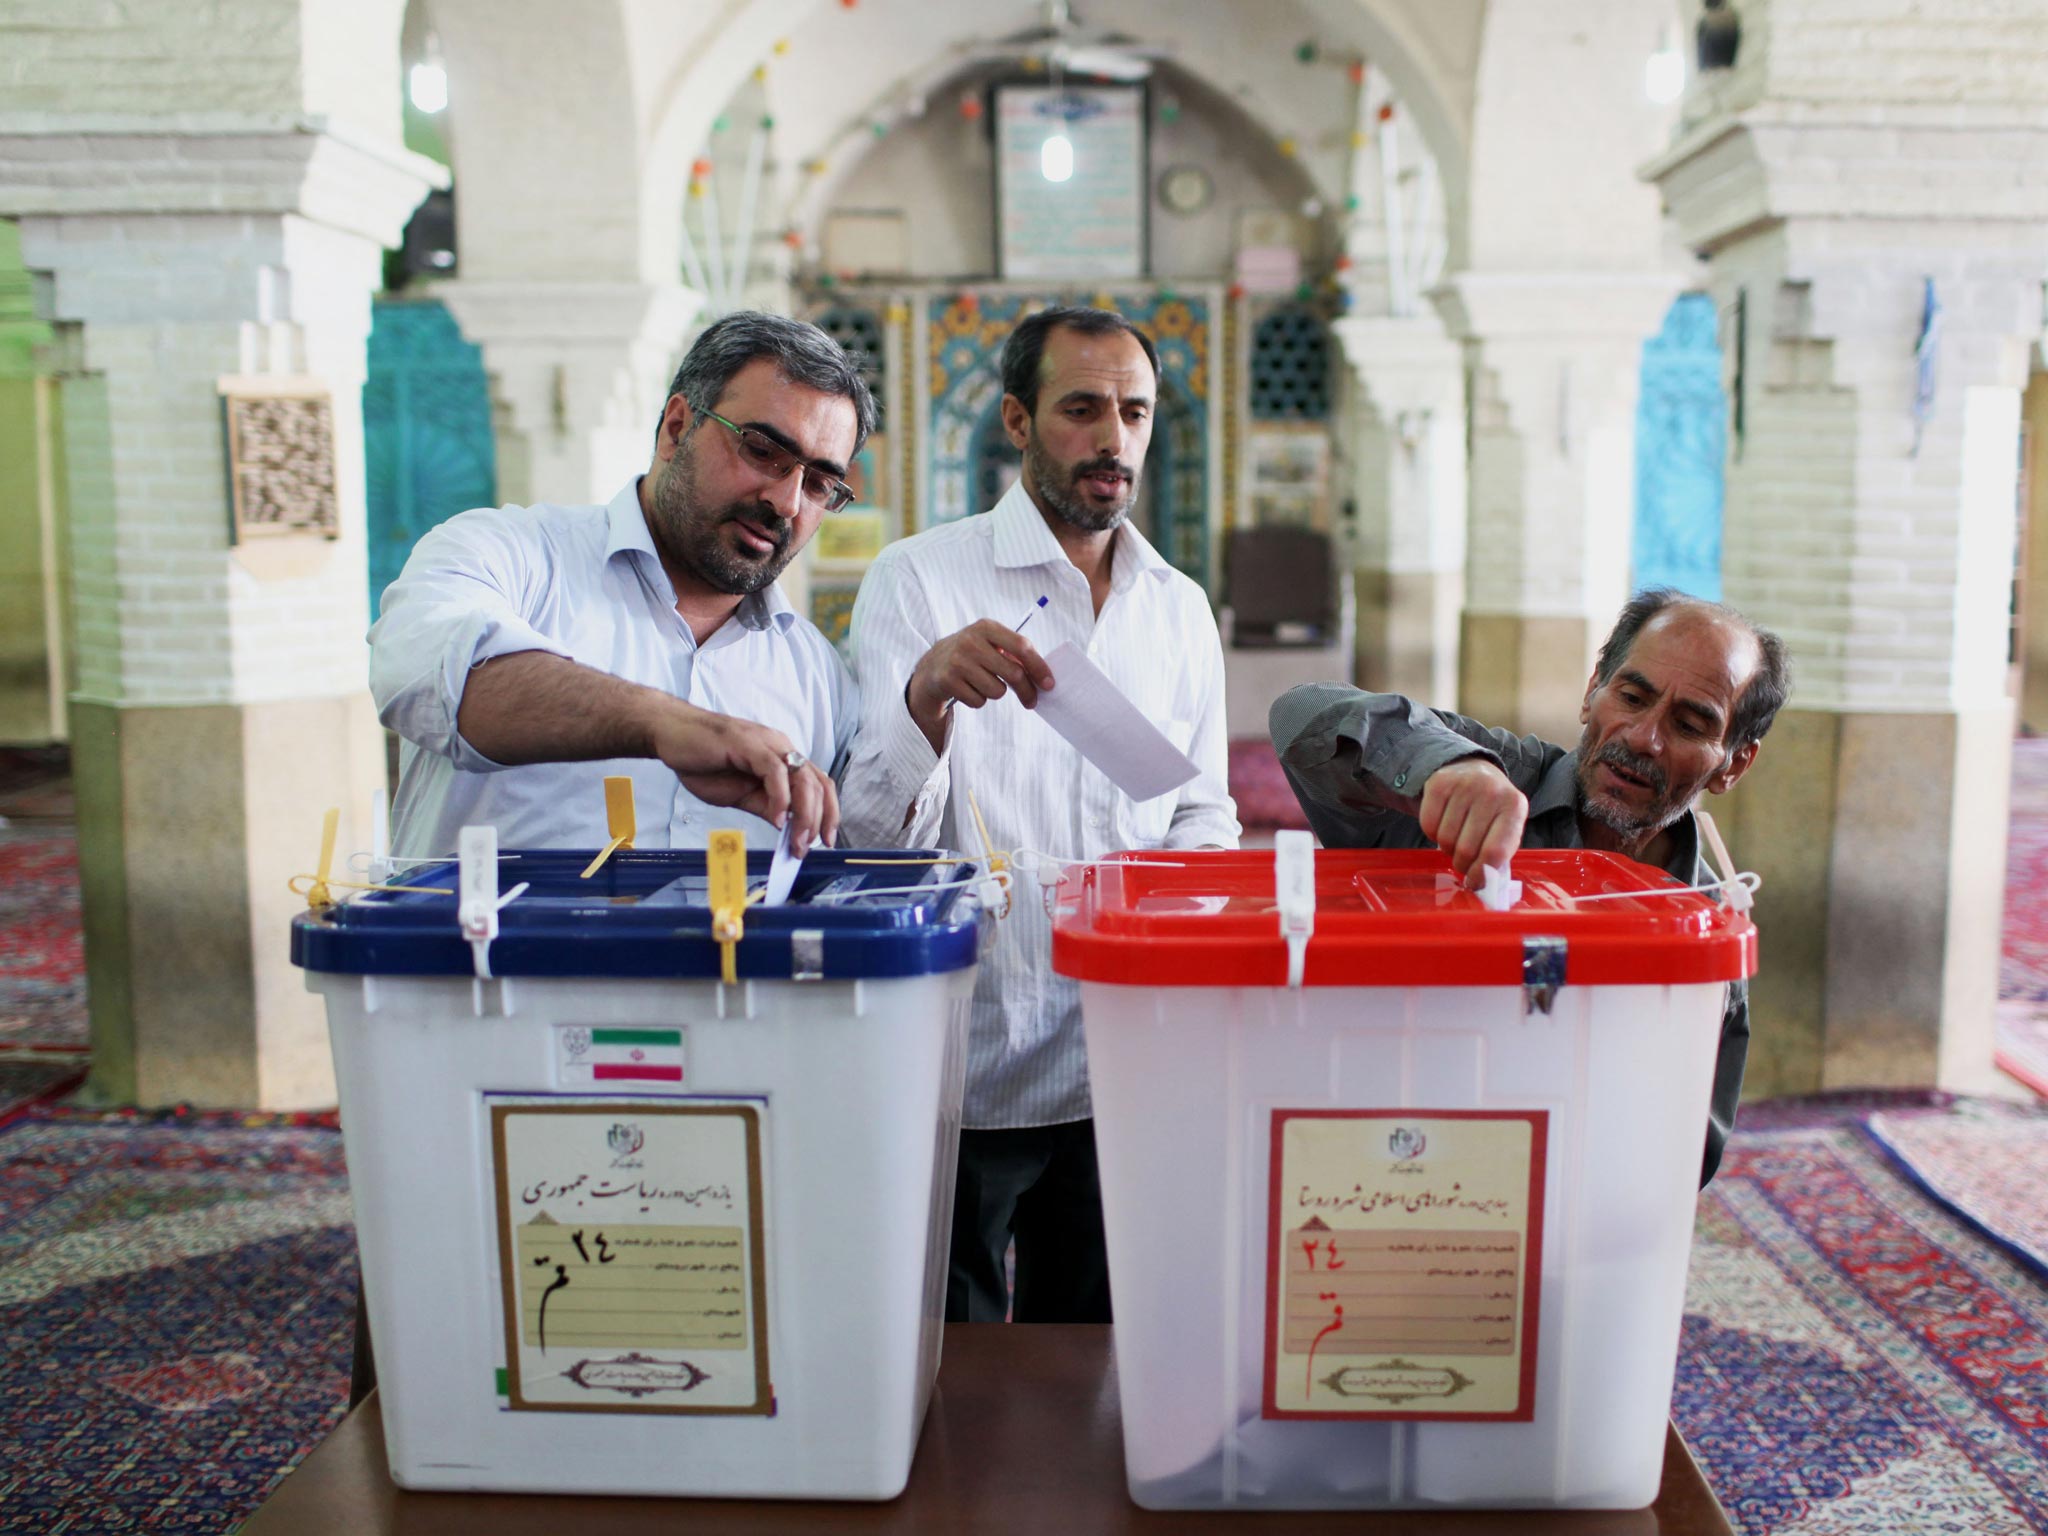 Iranian men cast their ballots during presidential elections at a polling station in Qom, 125 kilometers (78 miles) south of the capital Tehran, Iran